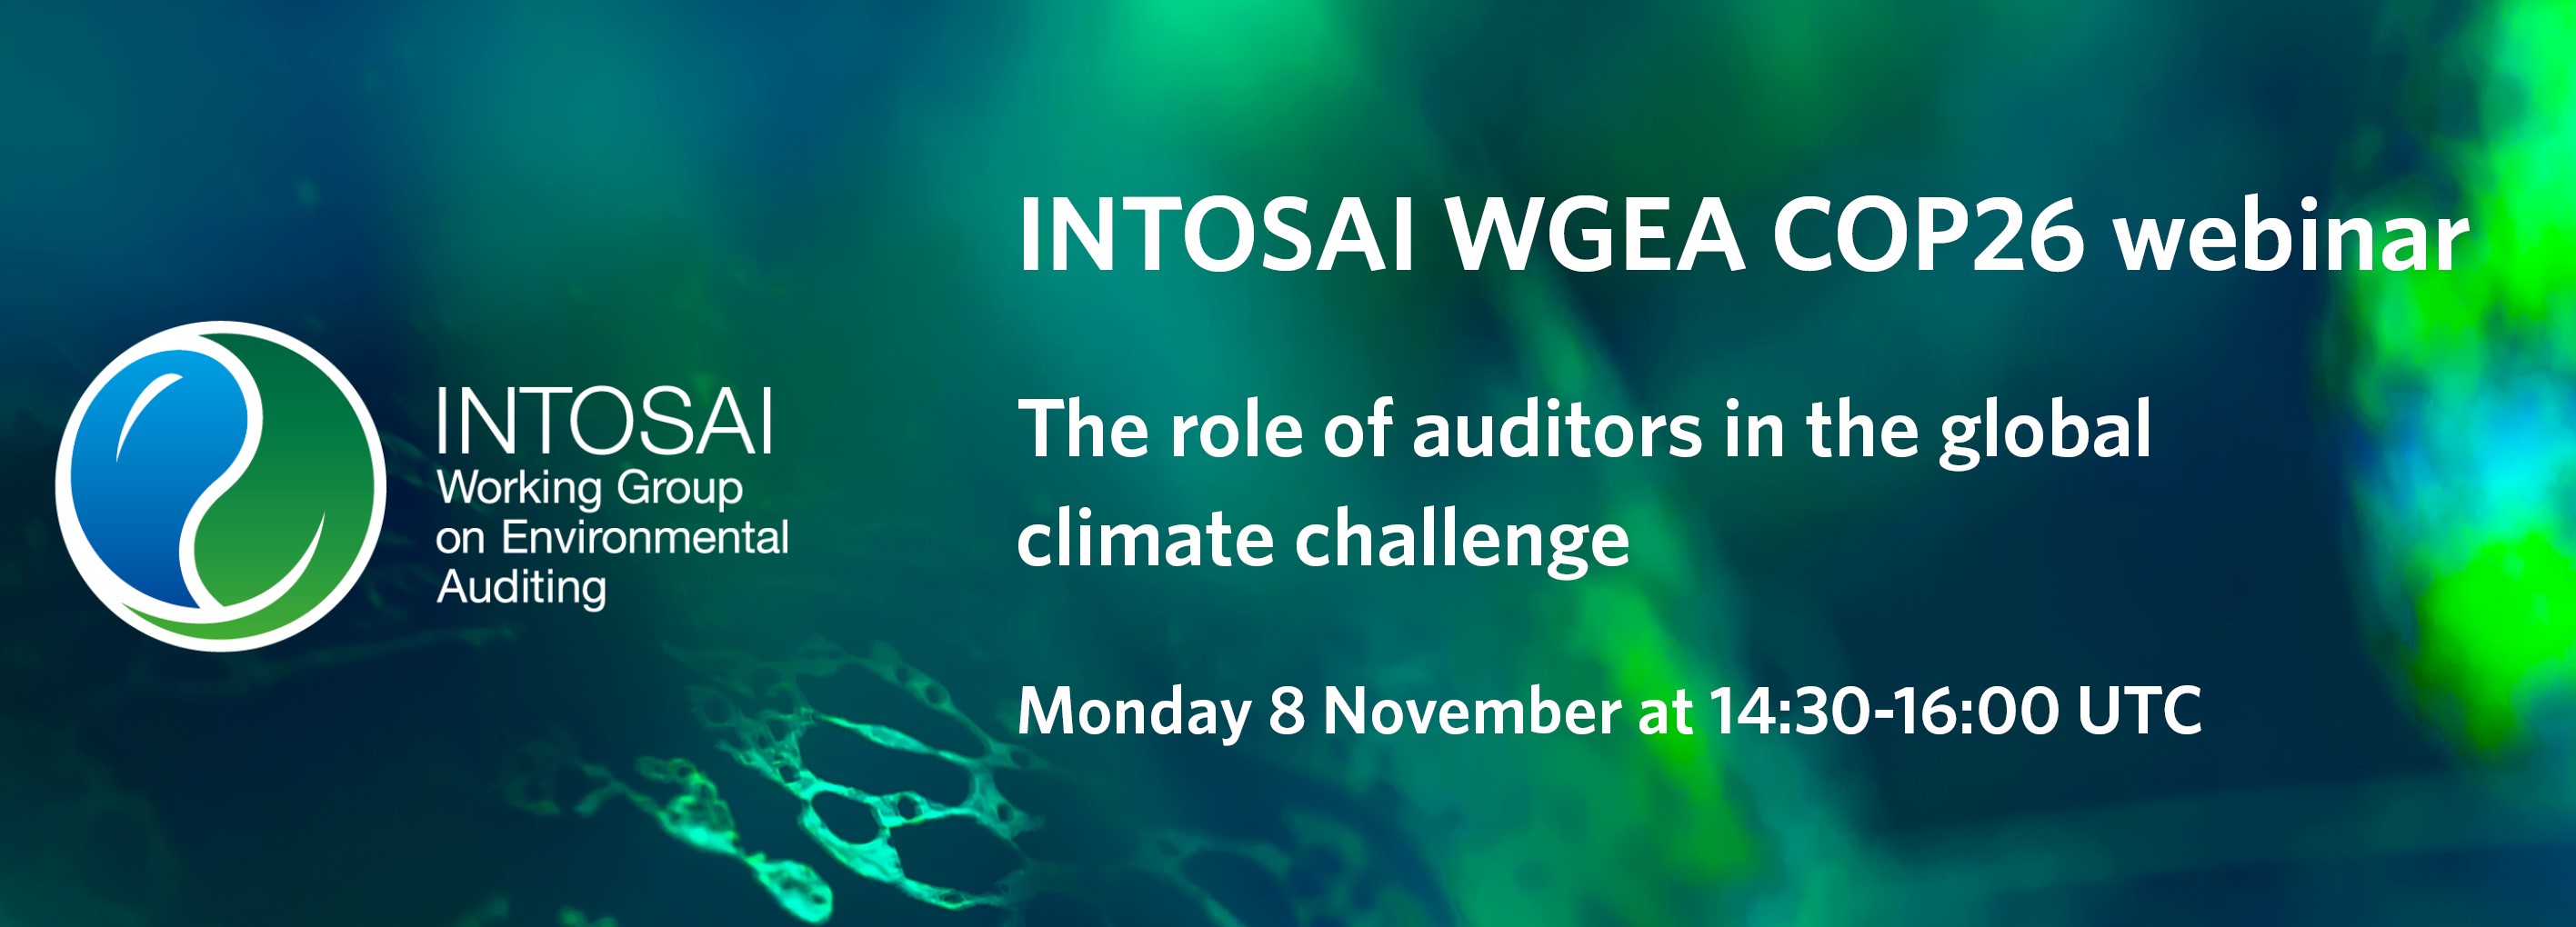 The INTOSAI WGEA COP26 Webinar - The role of auditors in the global climate challenge 